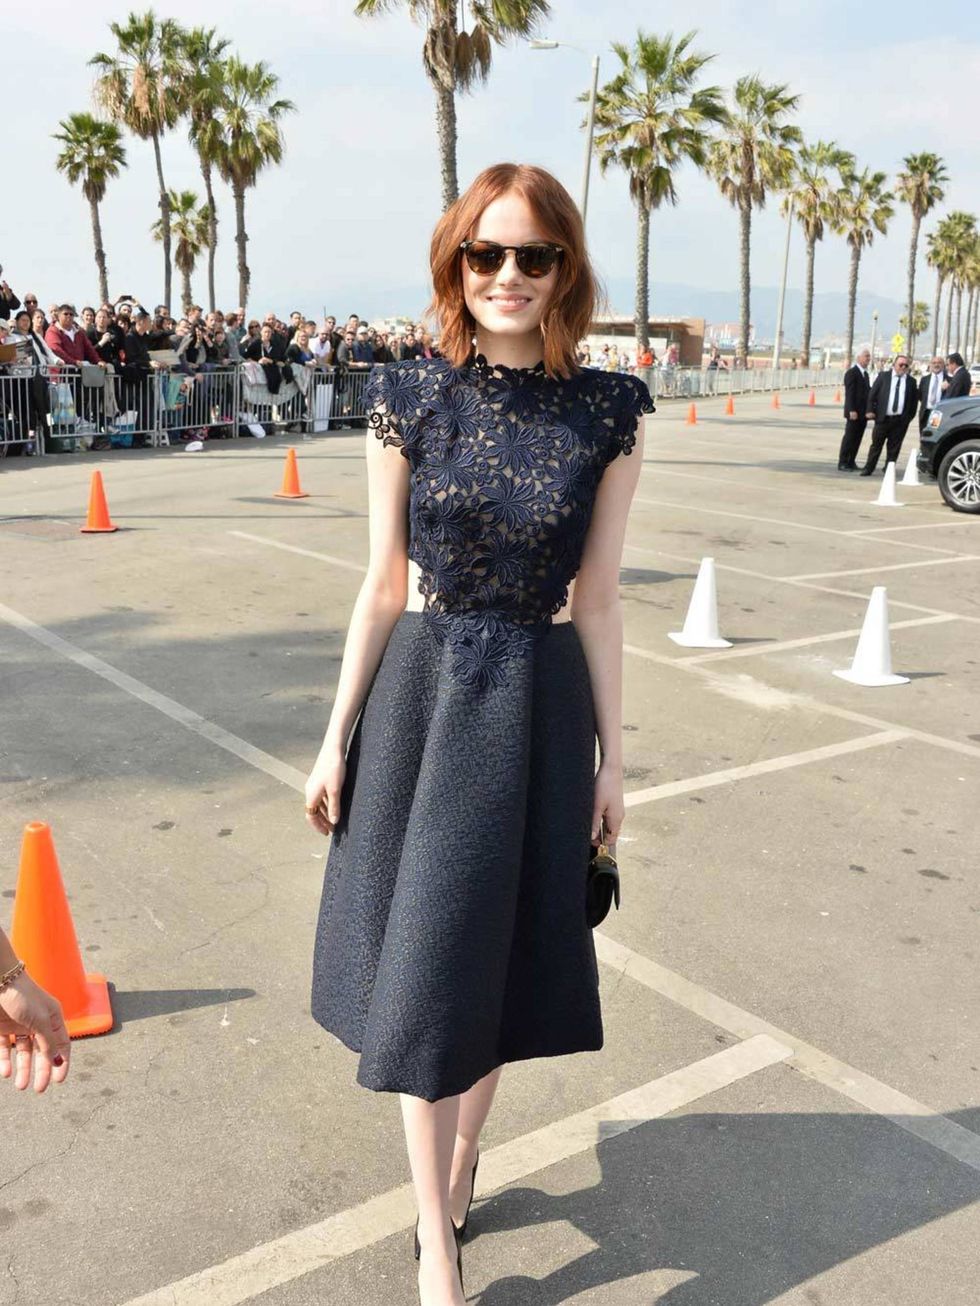 Emma Stone at the 2015 Film Independent Spirit Awards in California, february 2015.